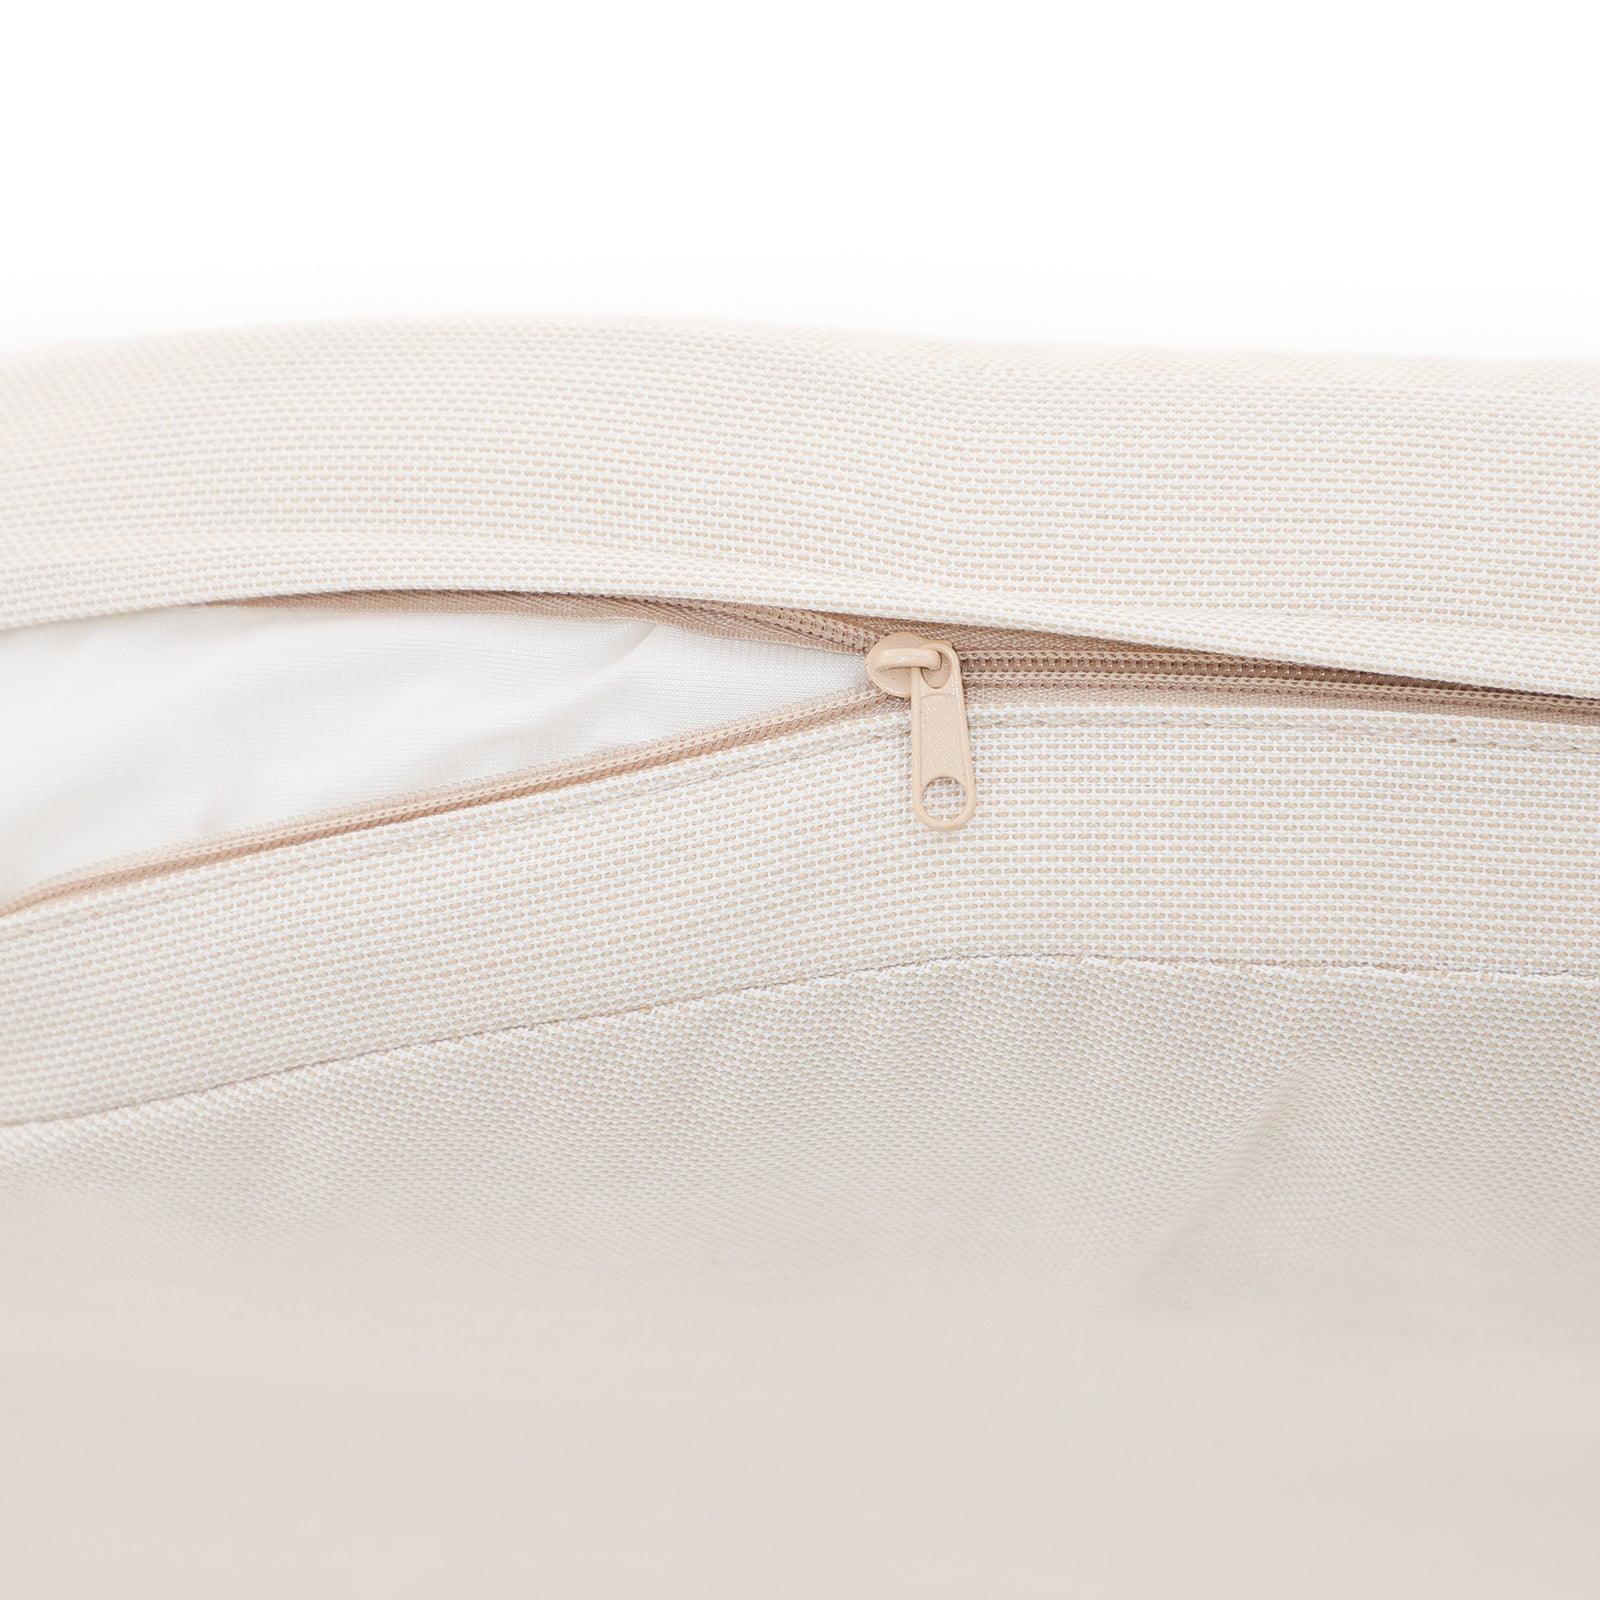 Menorca White Cushion, removable with zippers, detail-Jardina Furniture